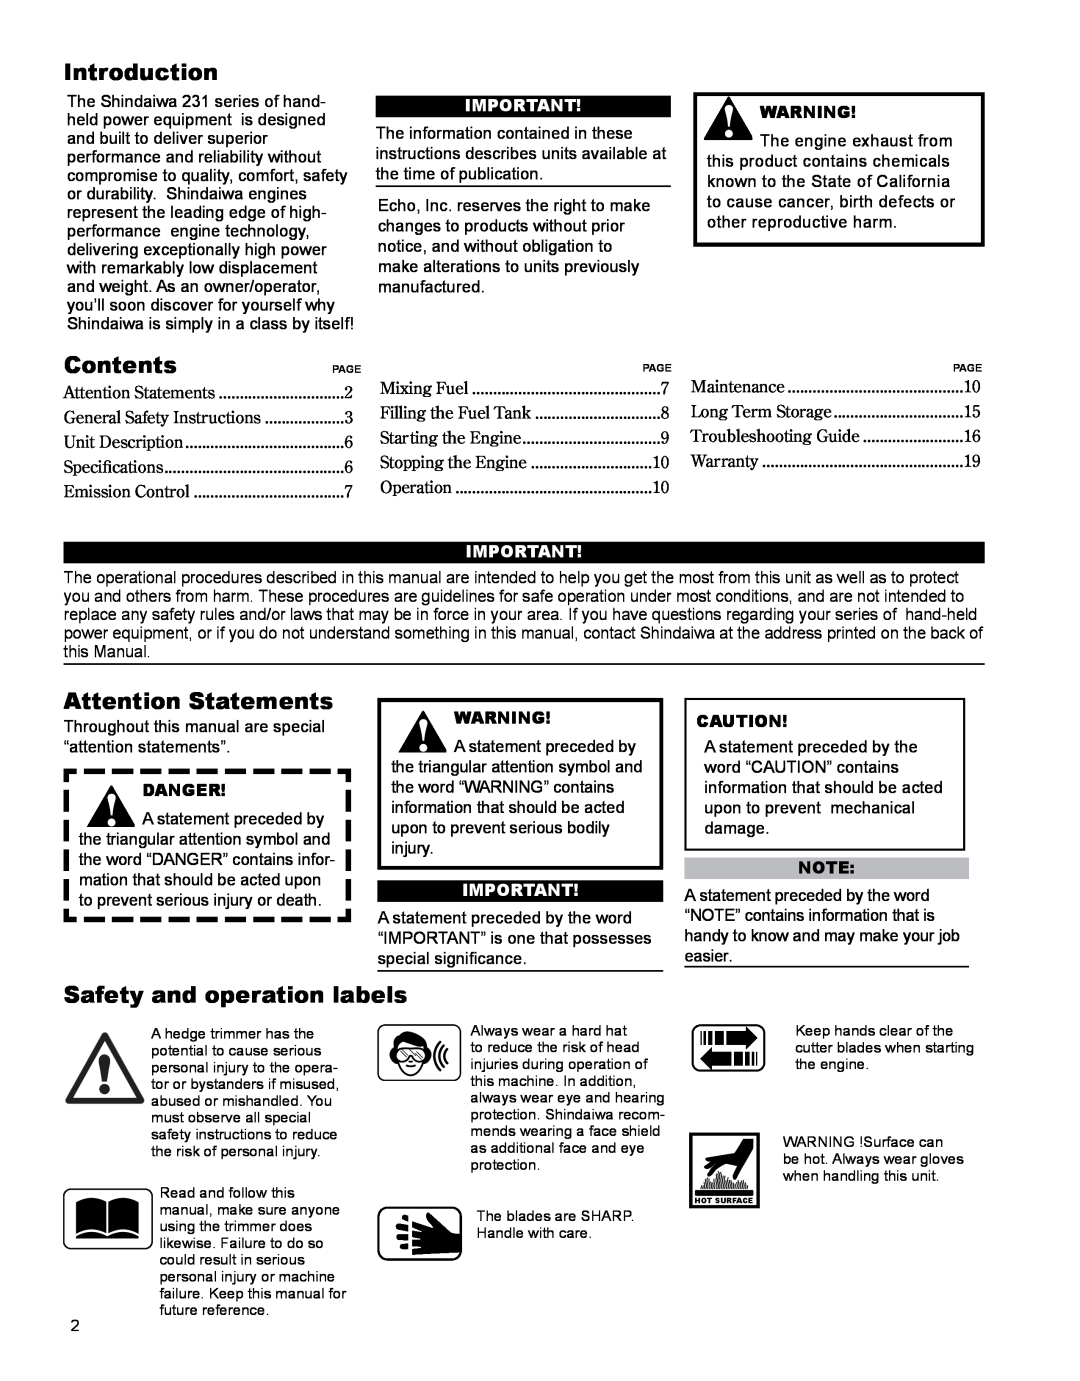 Shindaiwa X7502862900 manual Introduction, Contents, Attention Statements, Safety and operation labels, Danger 